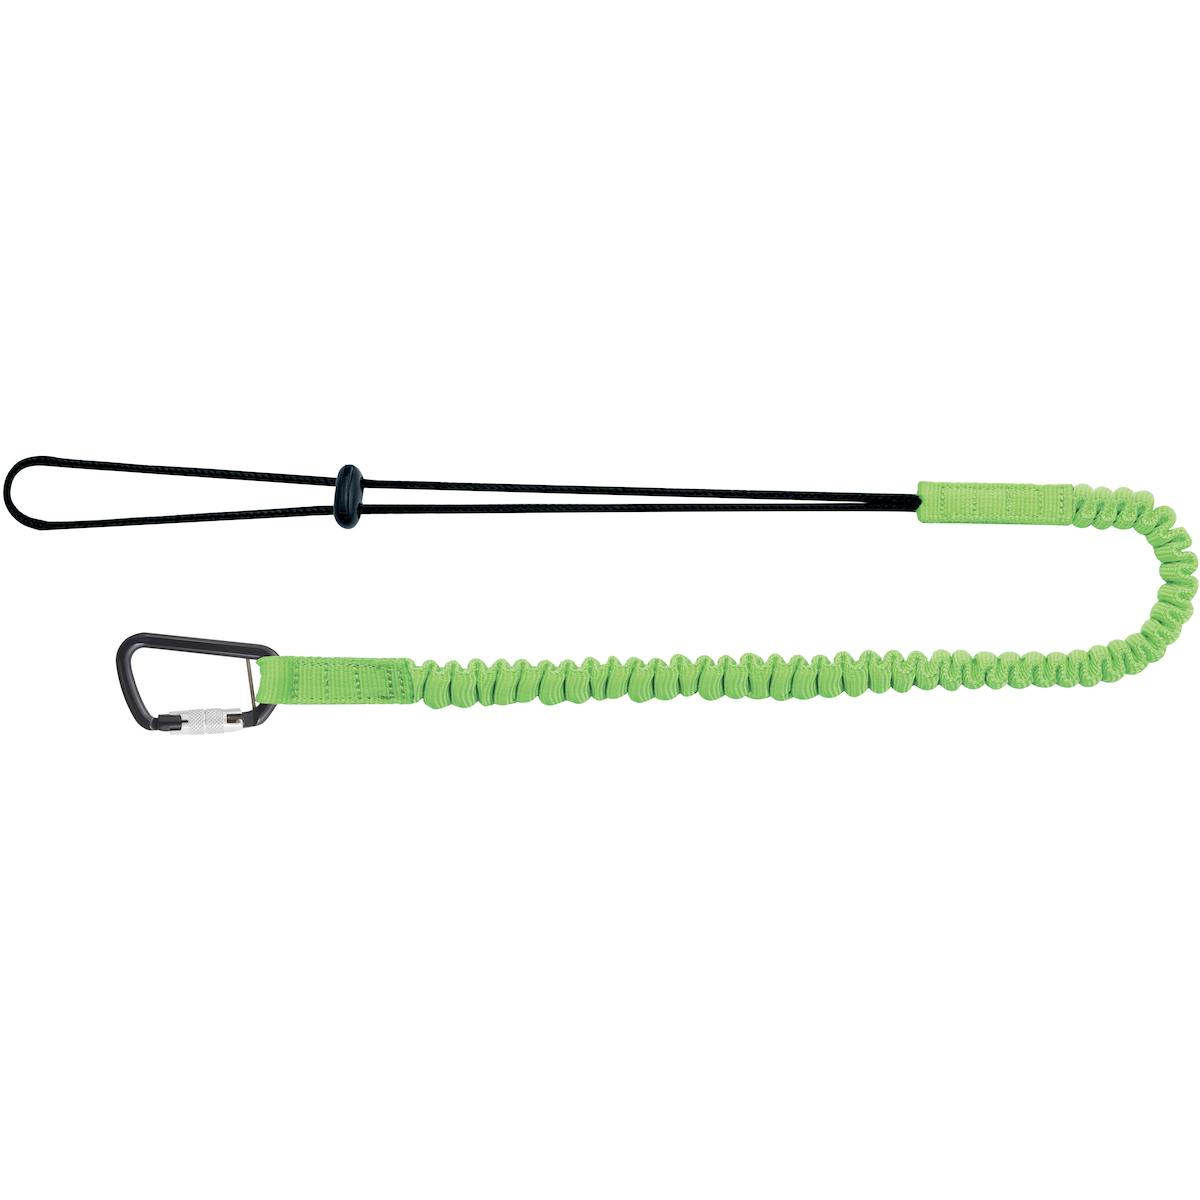 Tool Tethering Kit - includes single leg lanyard, tool connectors, and tool tape - Retail Packed, Green (533-900101) - OS_0